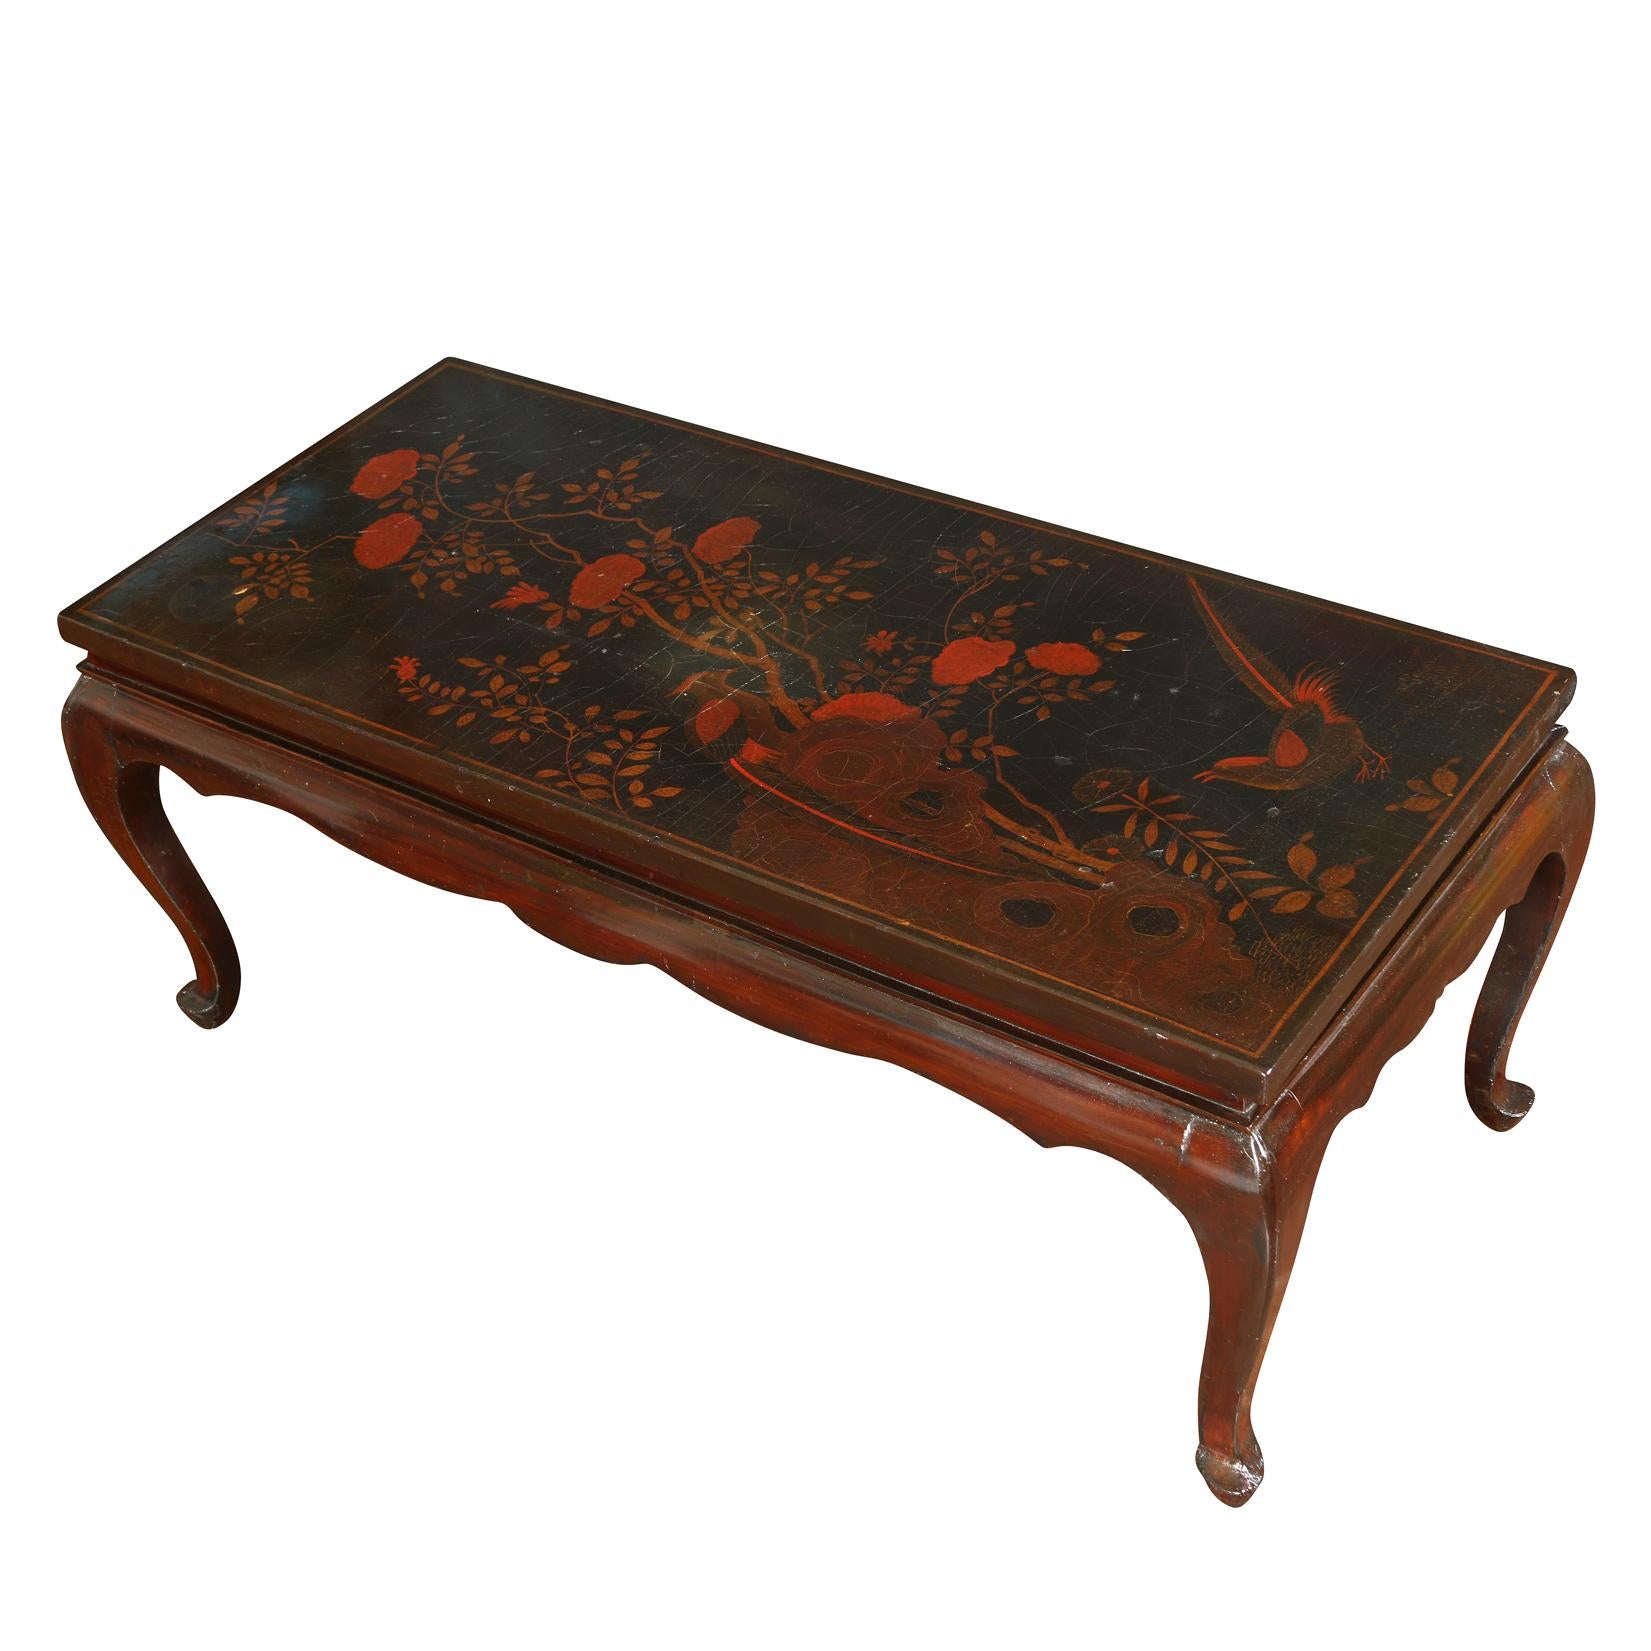 Antique chinoiserie lacquered, low coffee table with red flower detail and cabriole legs.